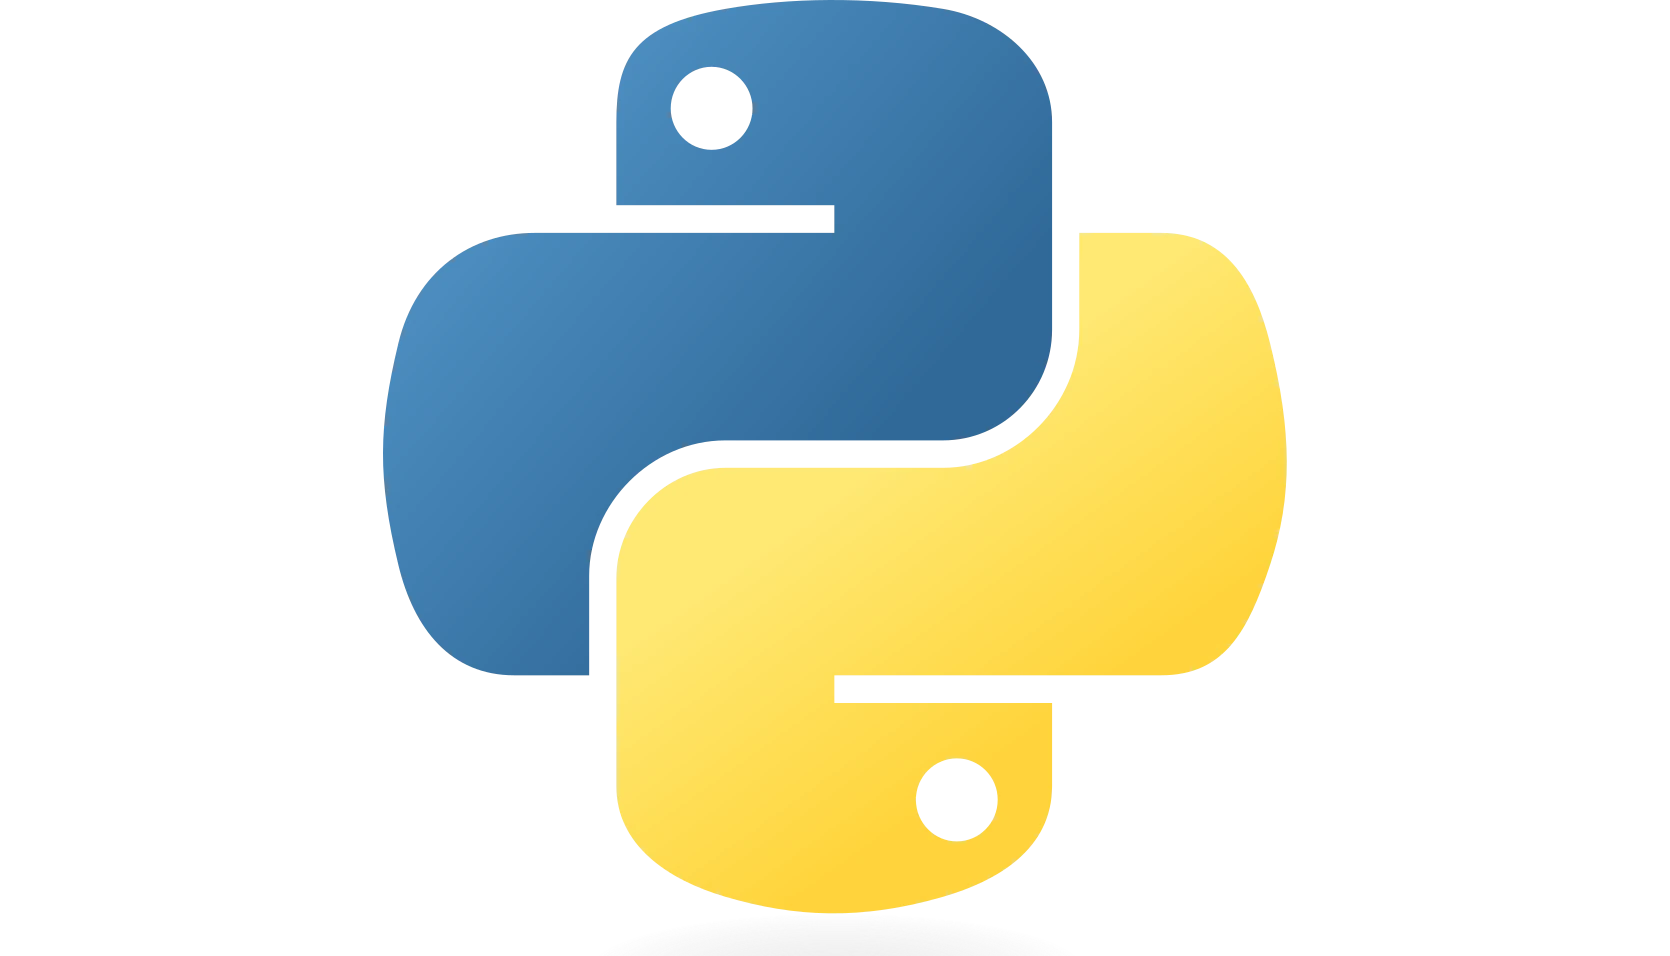 The blue and yellow Python logo, seemingly two interlocking snakes (which are probably pythons, now I think about it)